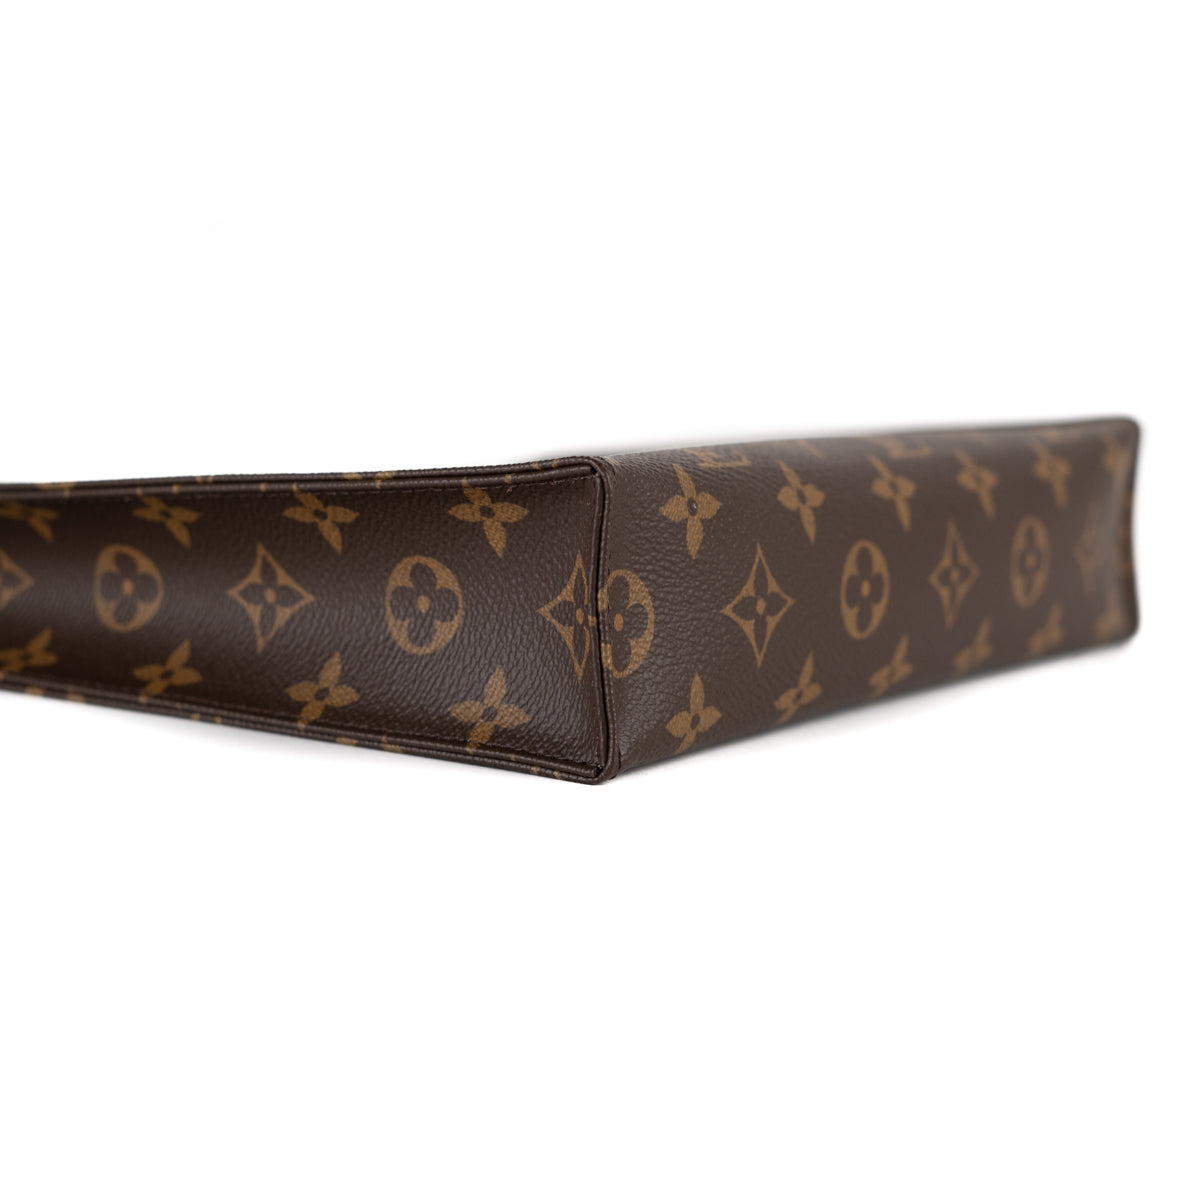 LOUIS VUITTON Toiletry bag in monogram canvas with gold …